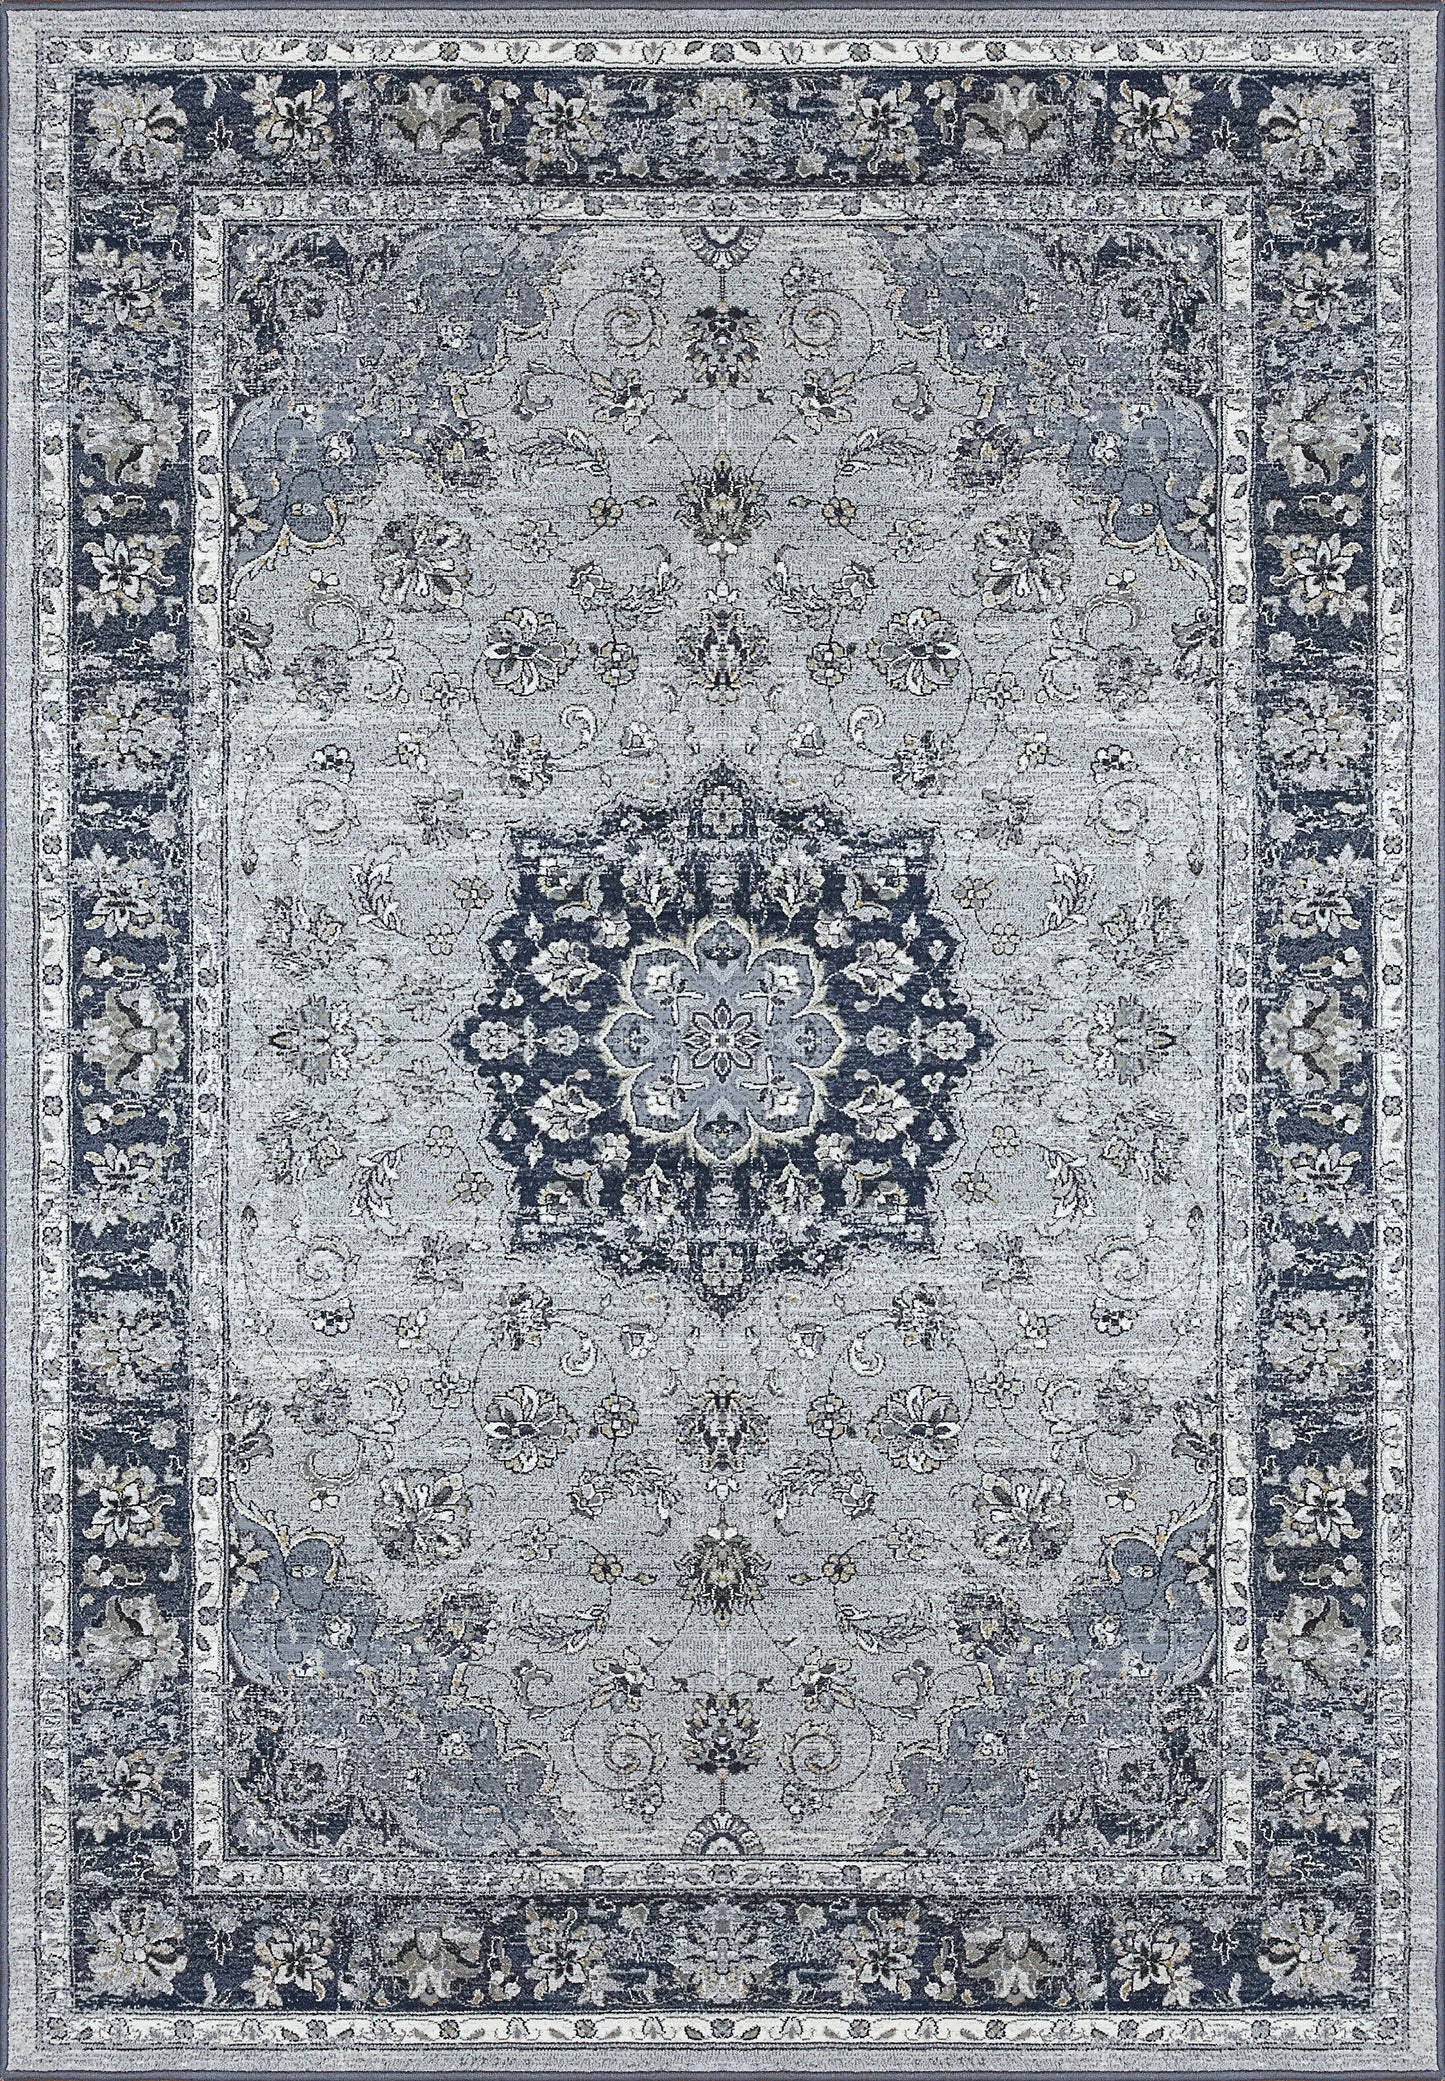 Dynamic Rugs Ancient Garden 57559-9686 Silver/Blue Area Rug